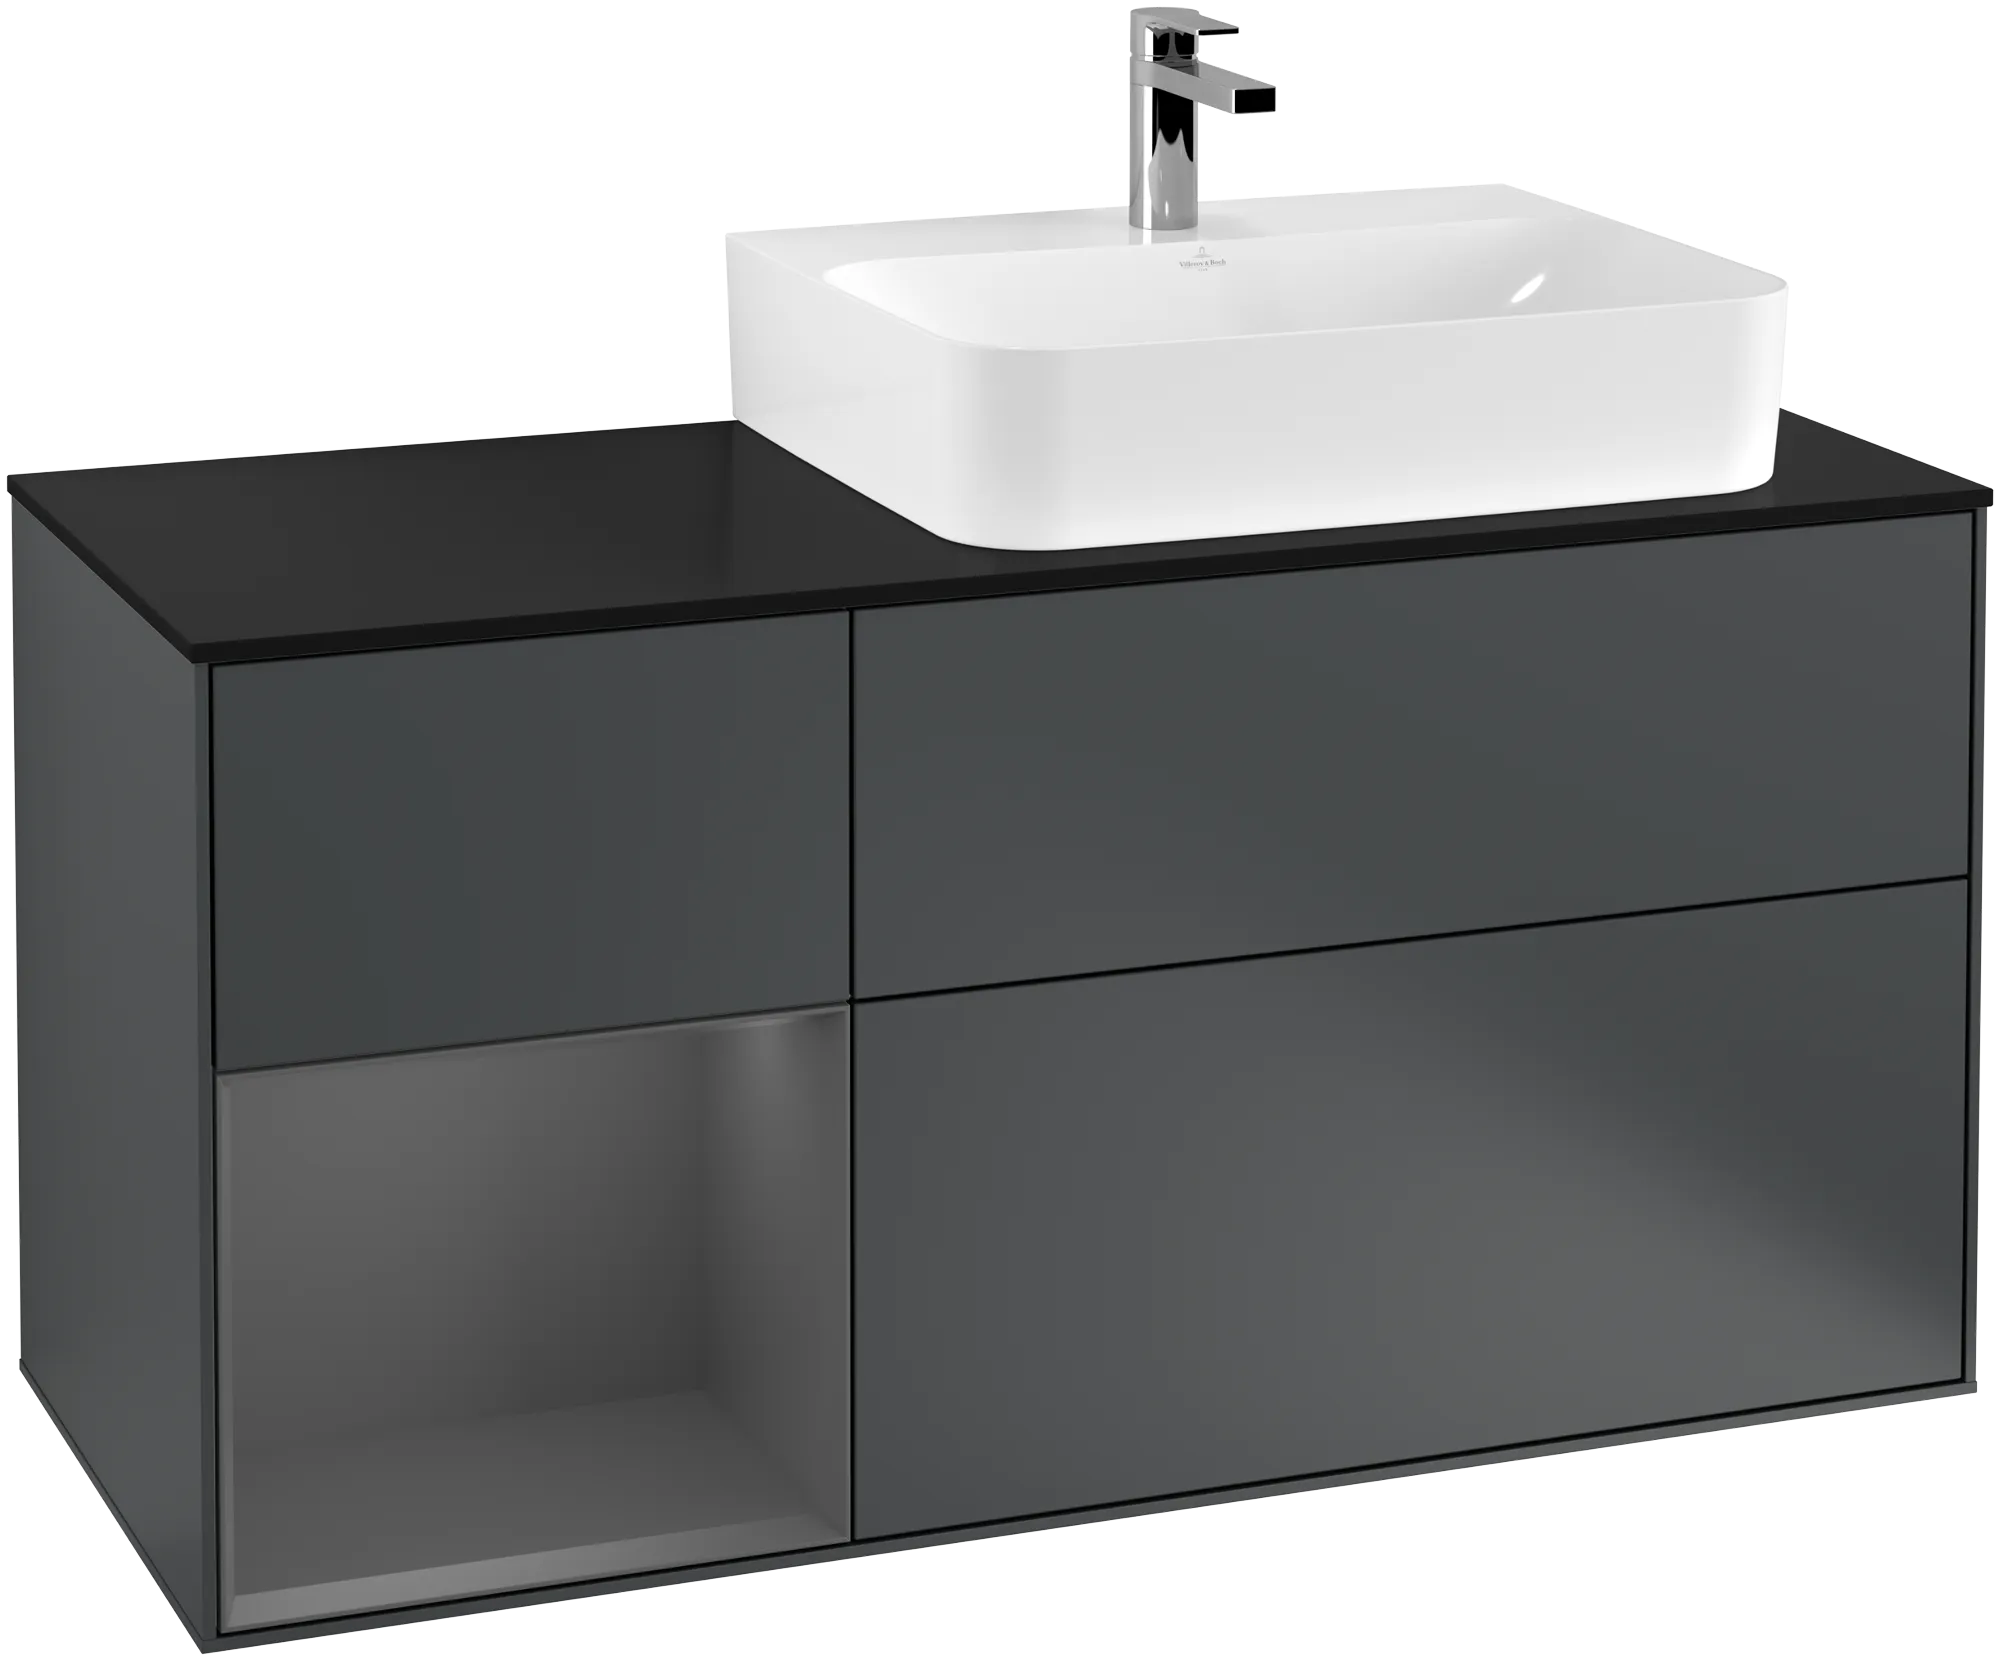 Picture of VILLEROY BOCH Finion Vanity unit, with lighting, 3 pull-out compartments, 1200 x 603 x 501 mm, Midnight Blue Matt Lacquer / Anthracite Matt Lacquer / Glass Black Matt #G142GKHG